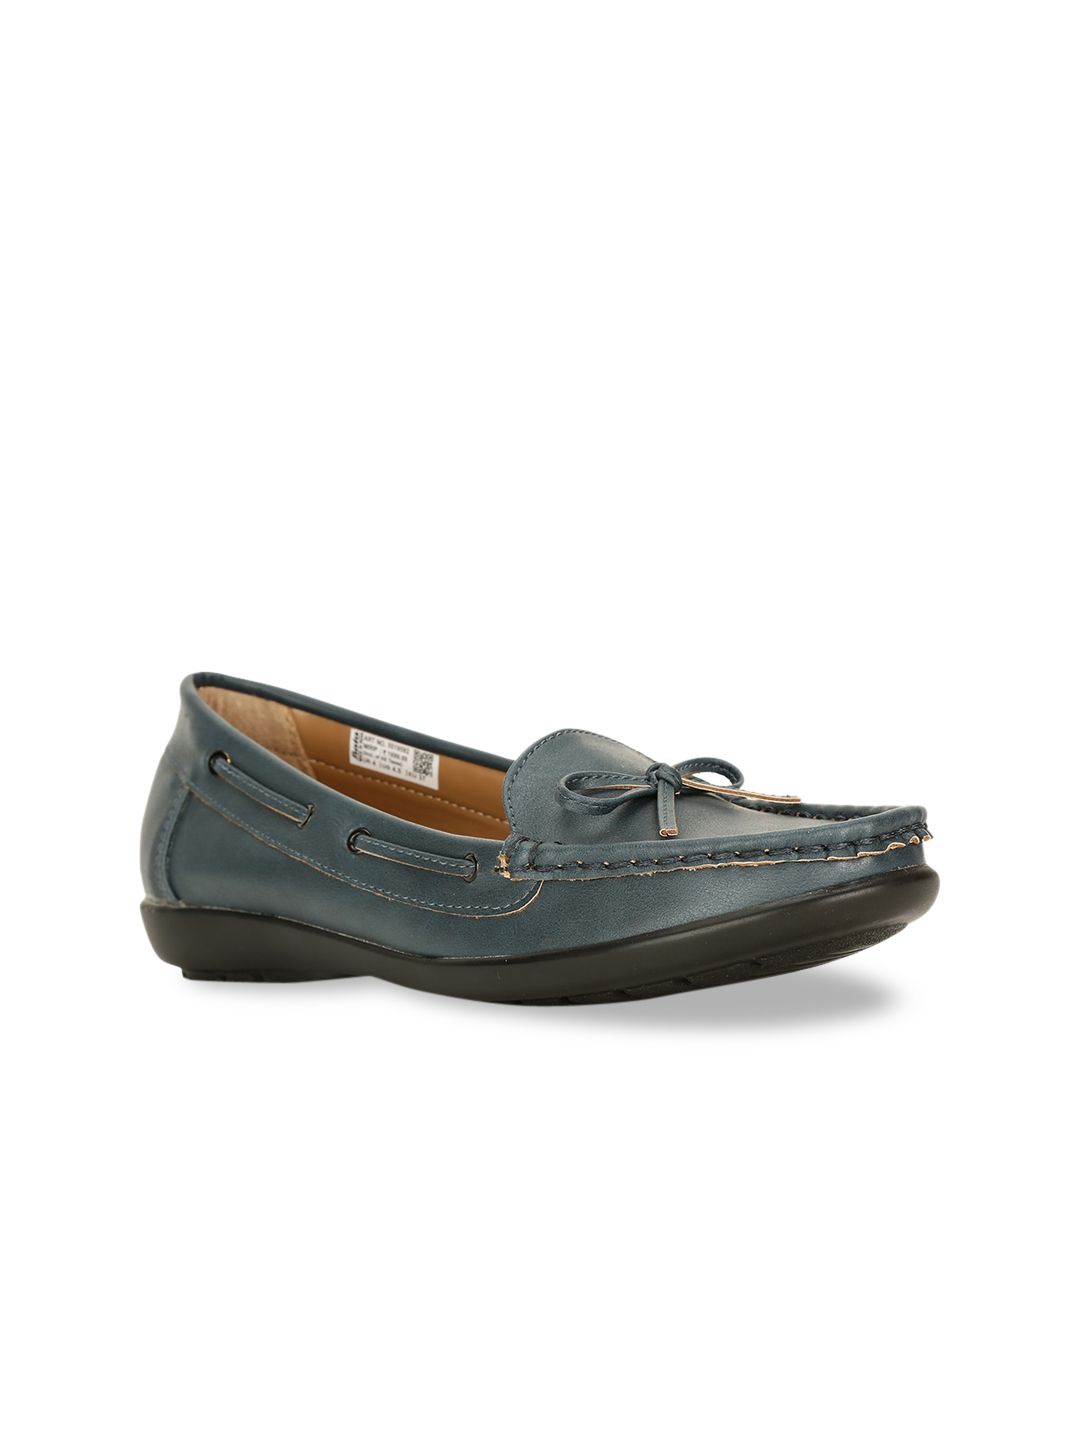 Bata Women Blue Textured Boat Shoes Price in India